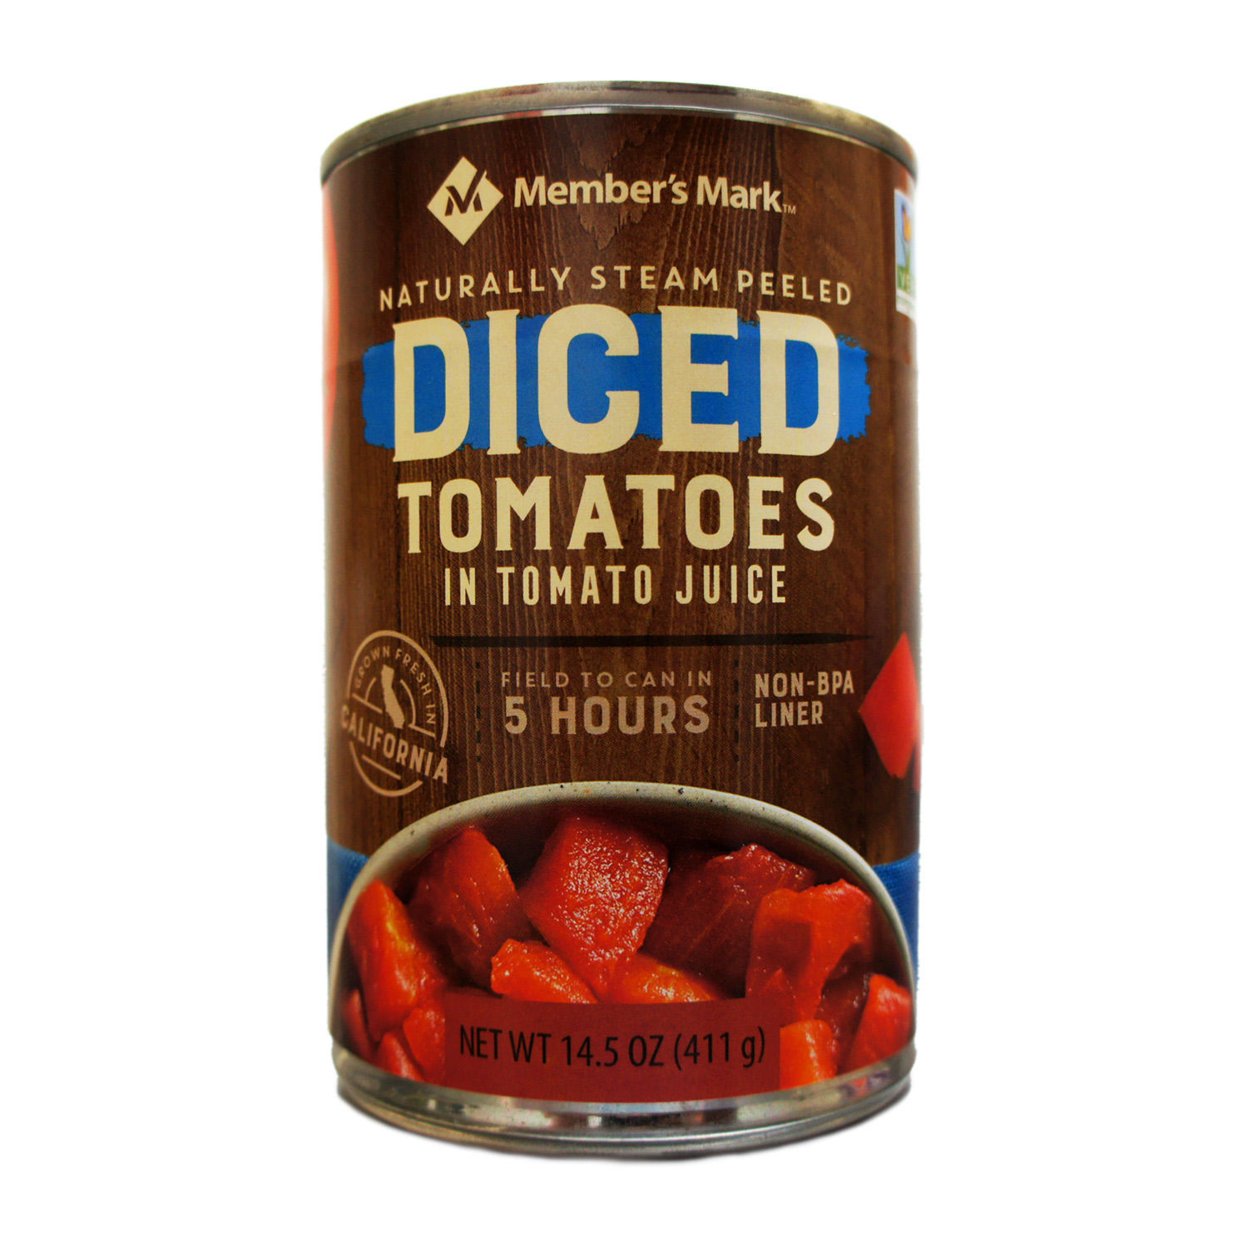 Member's Mark Diced Tomatoes In Tomato Juice, 14.5 Ounce (12 Pack)